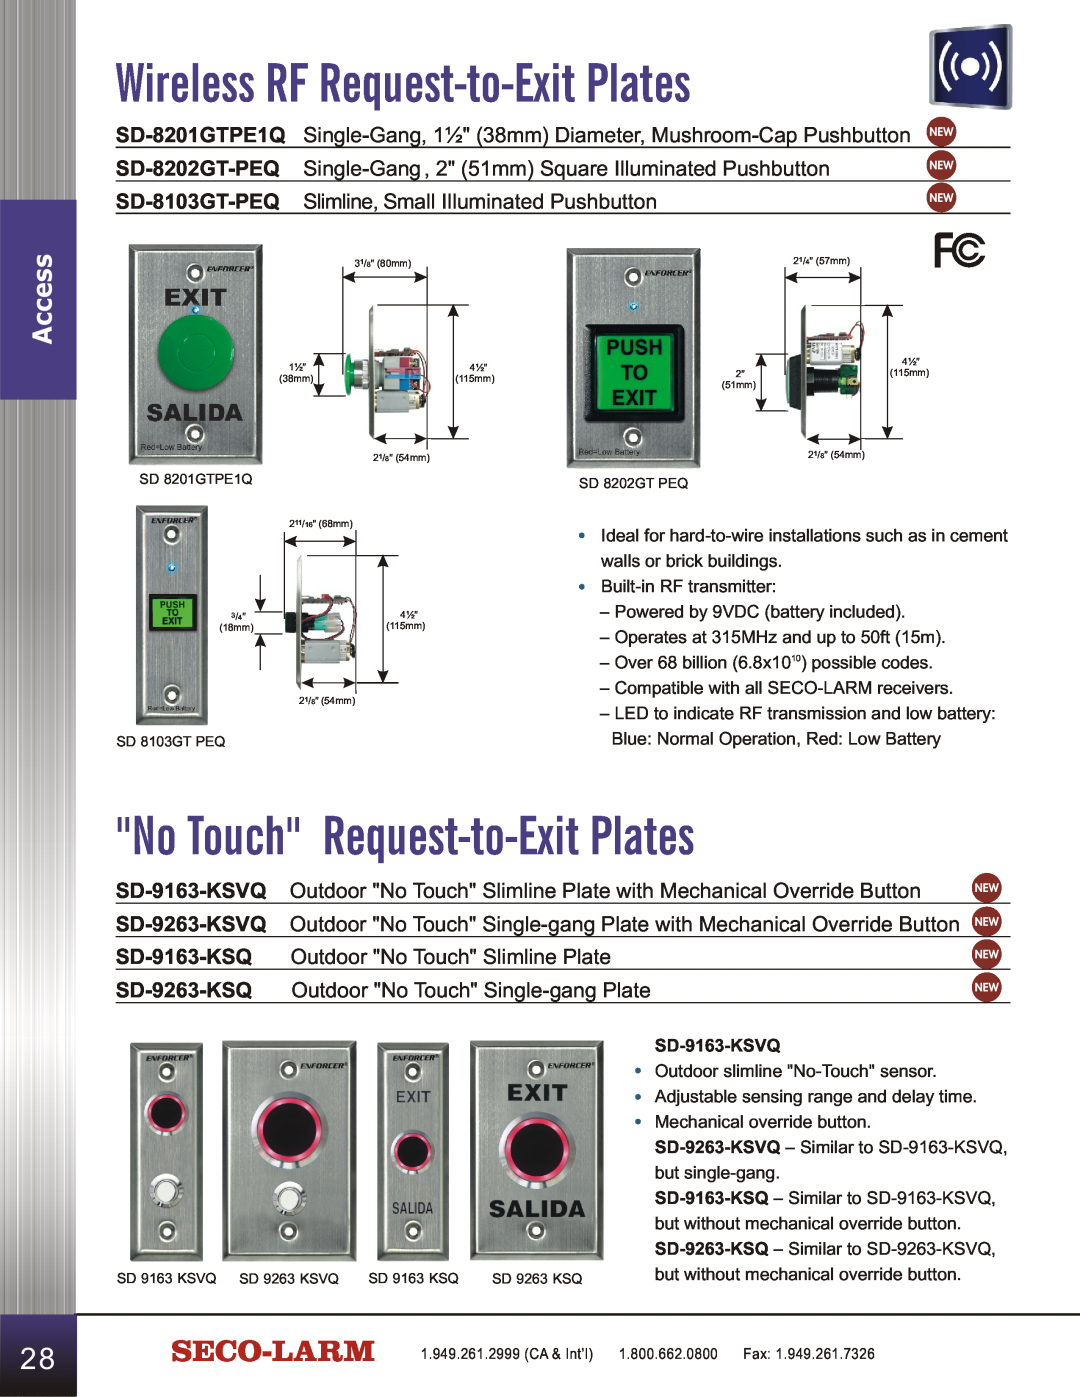 SECO-LARM USA SD-C141S Wireless RF Request-to-ExitPlates, No Touch Request-to-ExitPlates, Outdoor No Touch Slimline Plate 